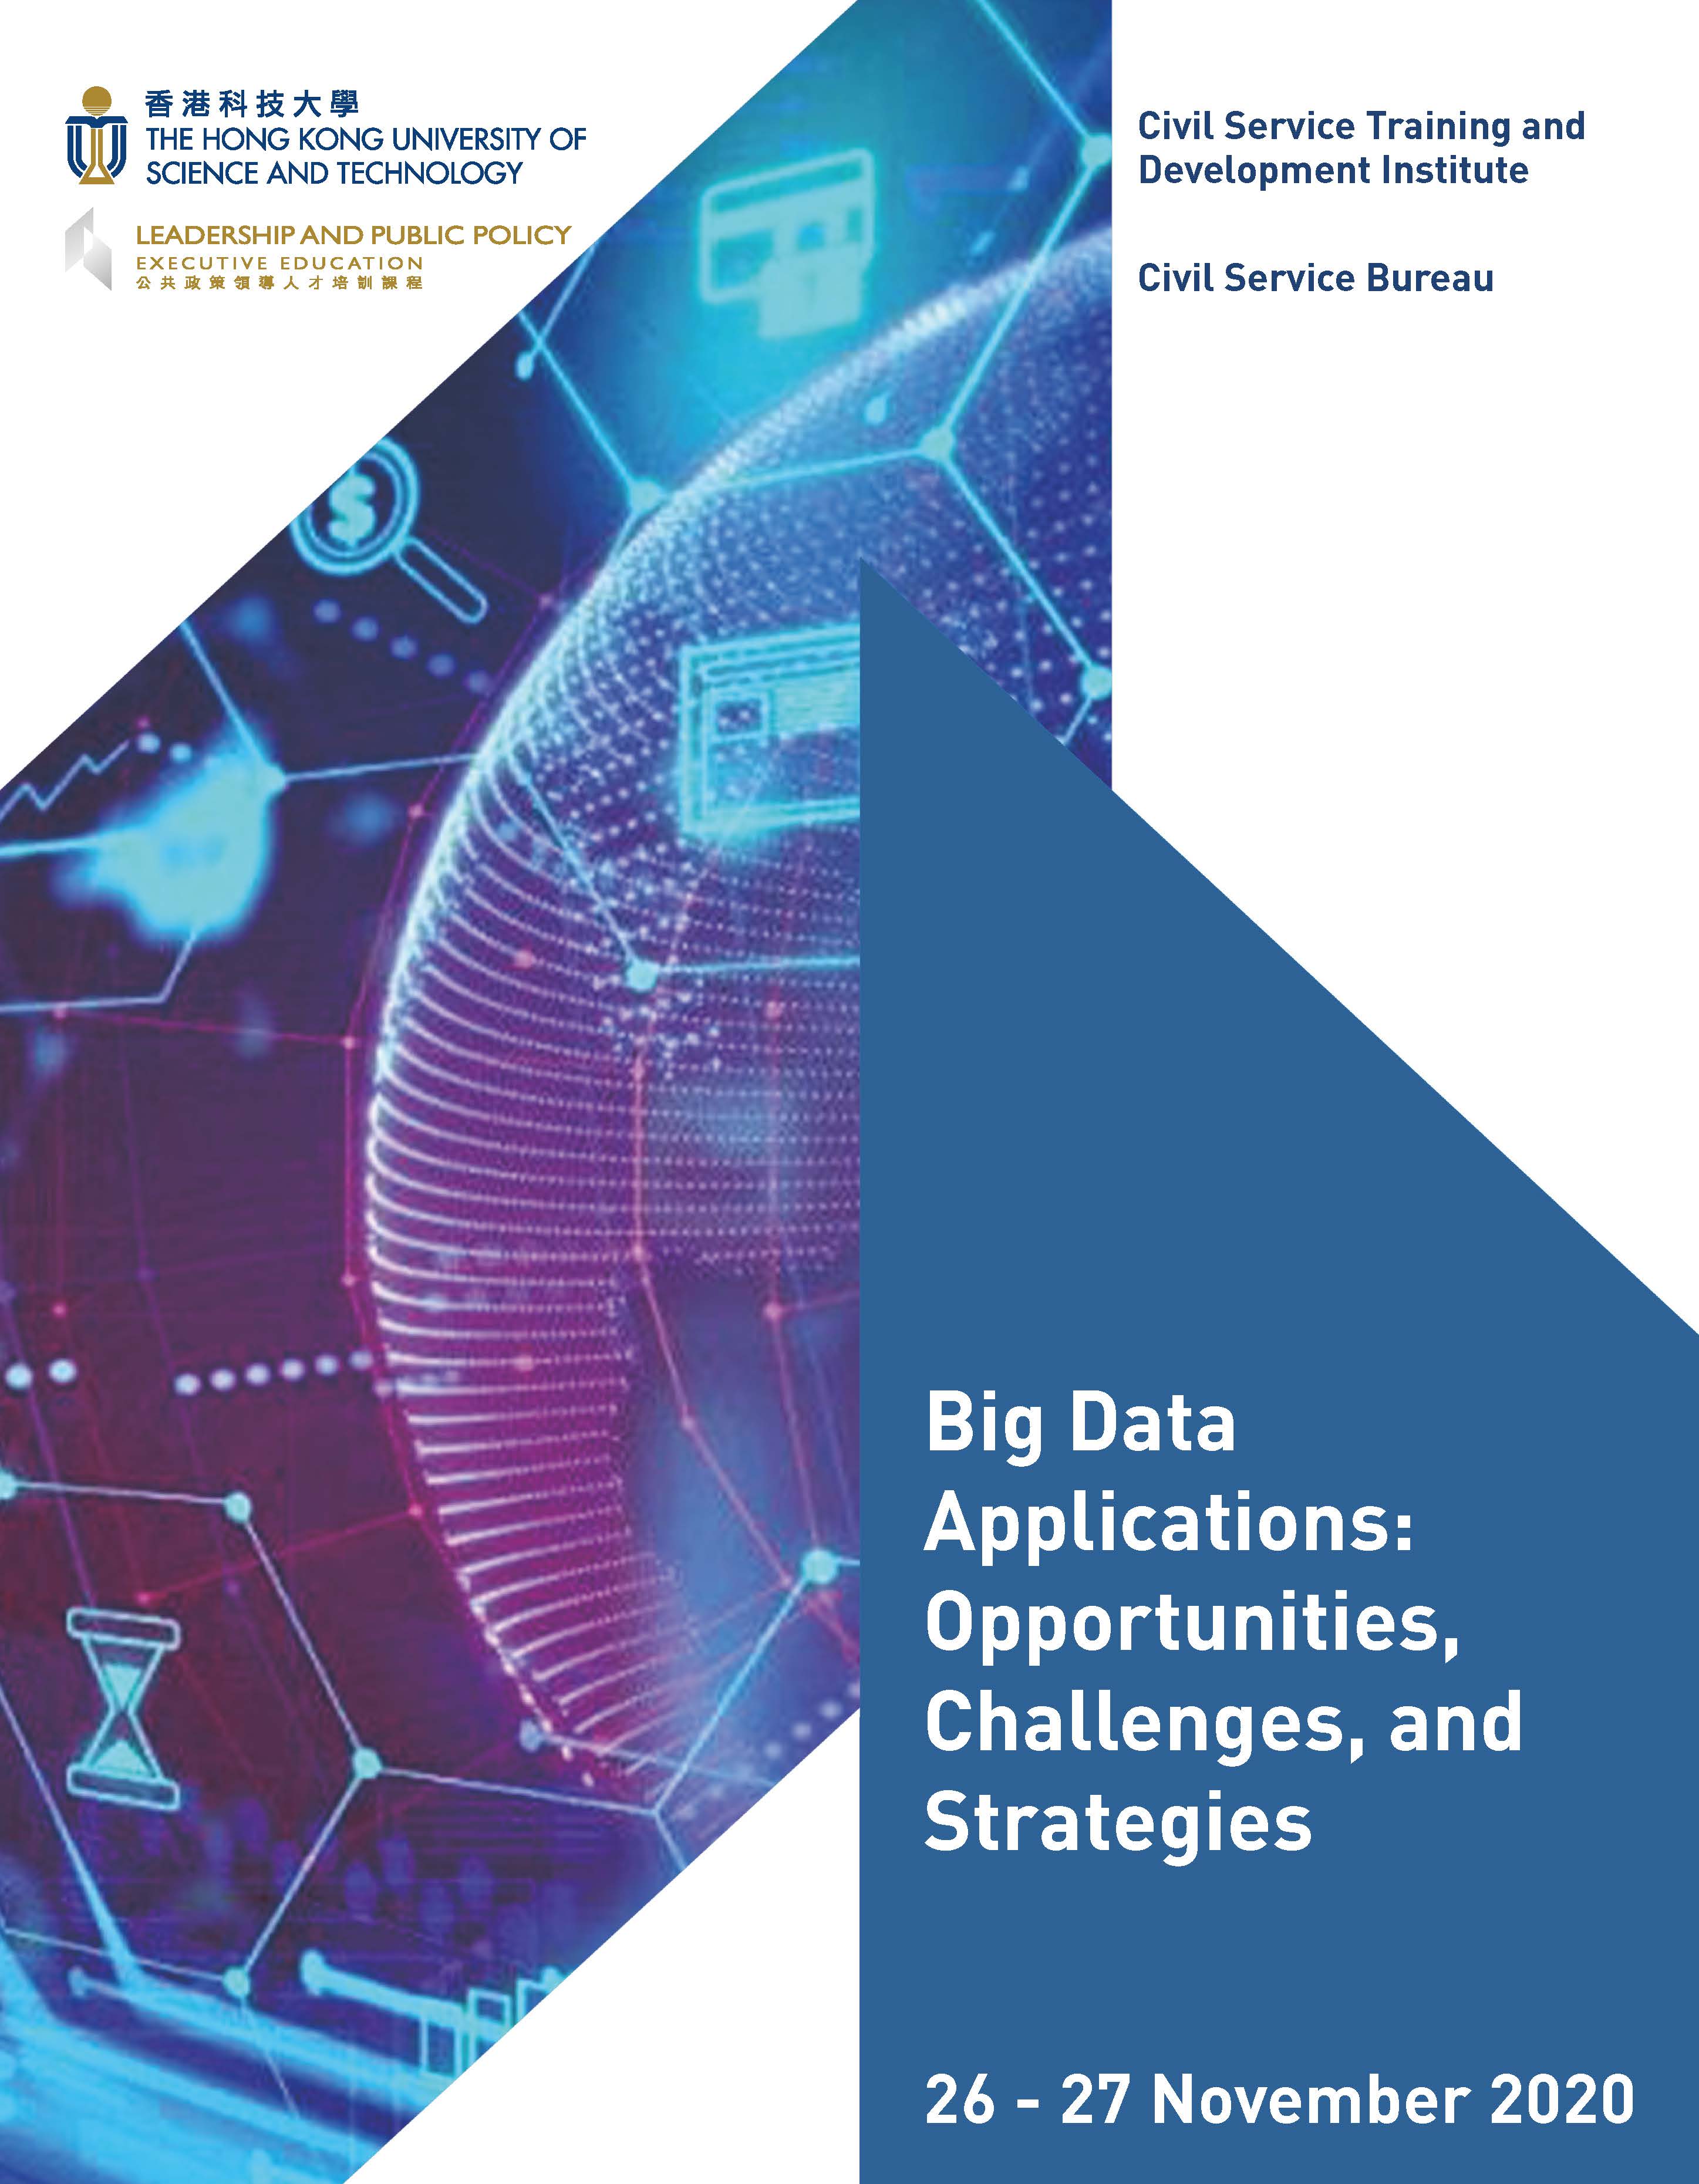 Big Data Applications: Opportunities, Challenges, and Strategies on 26-27 Nov 2020